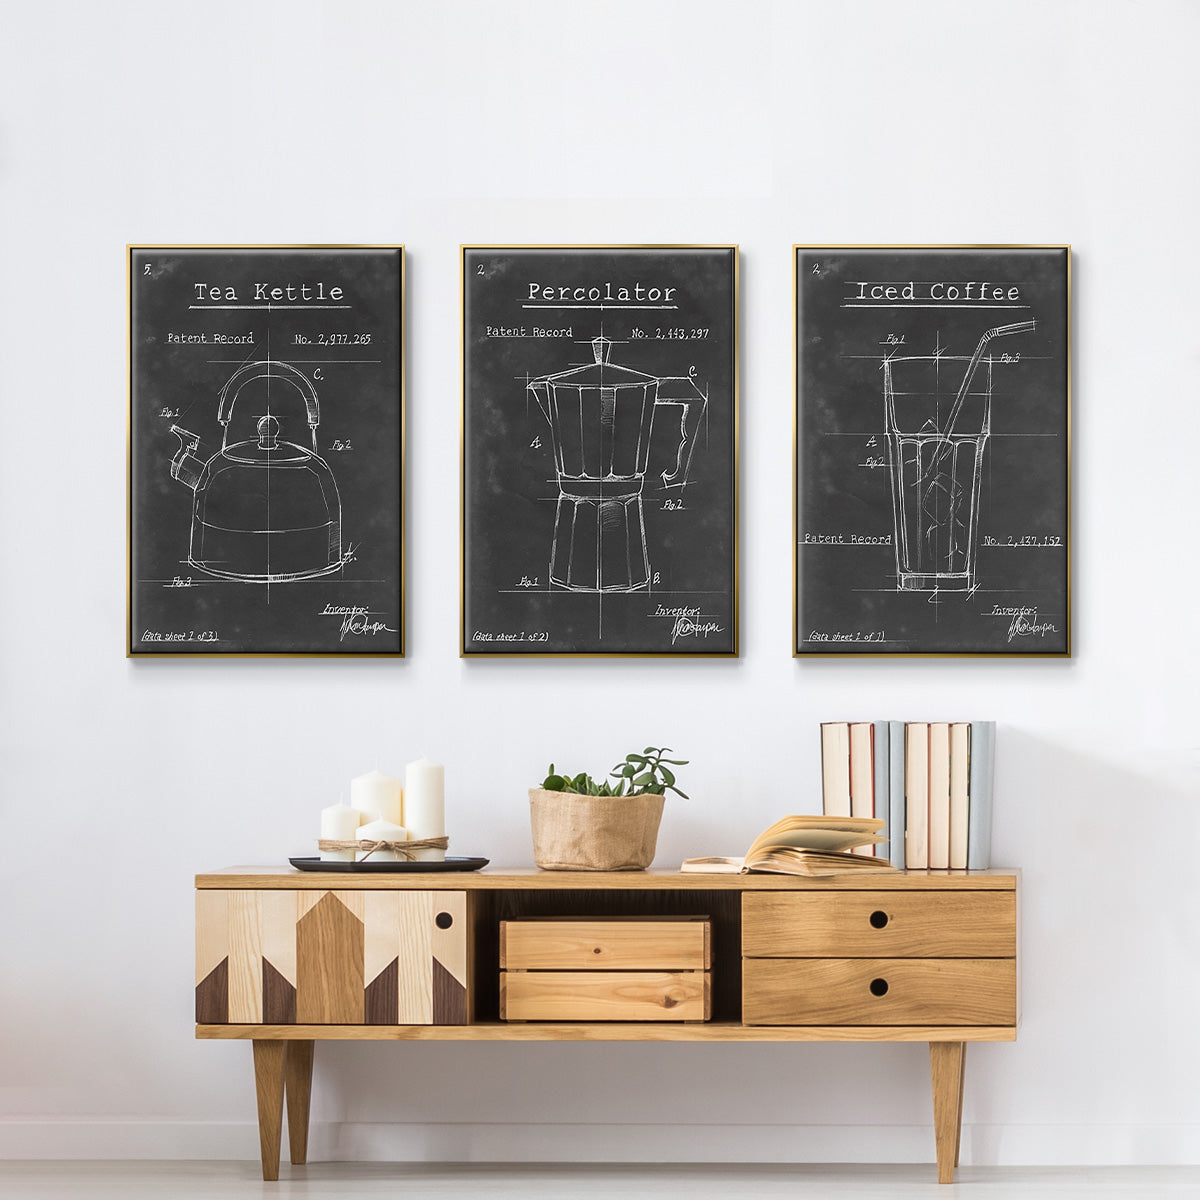 Morning Routine I - Framed Premium Gallery Wrapped Canvas L Frame 3 Piece Set - Ready to Hang